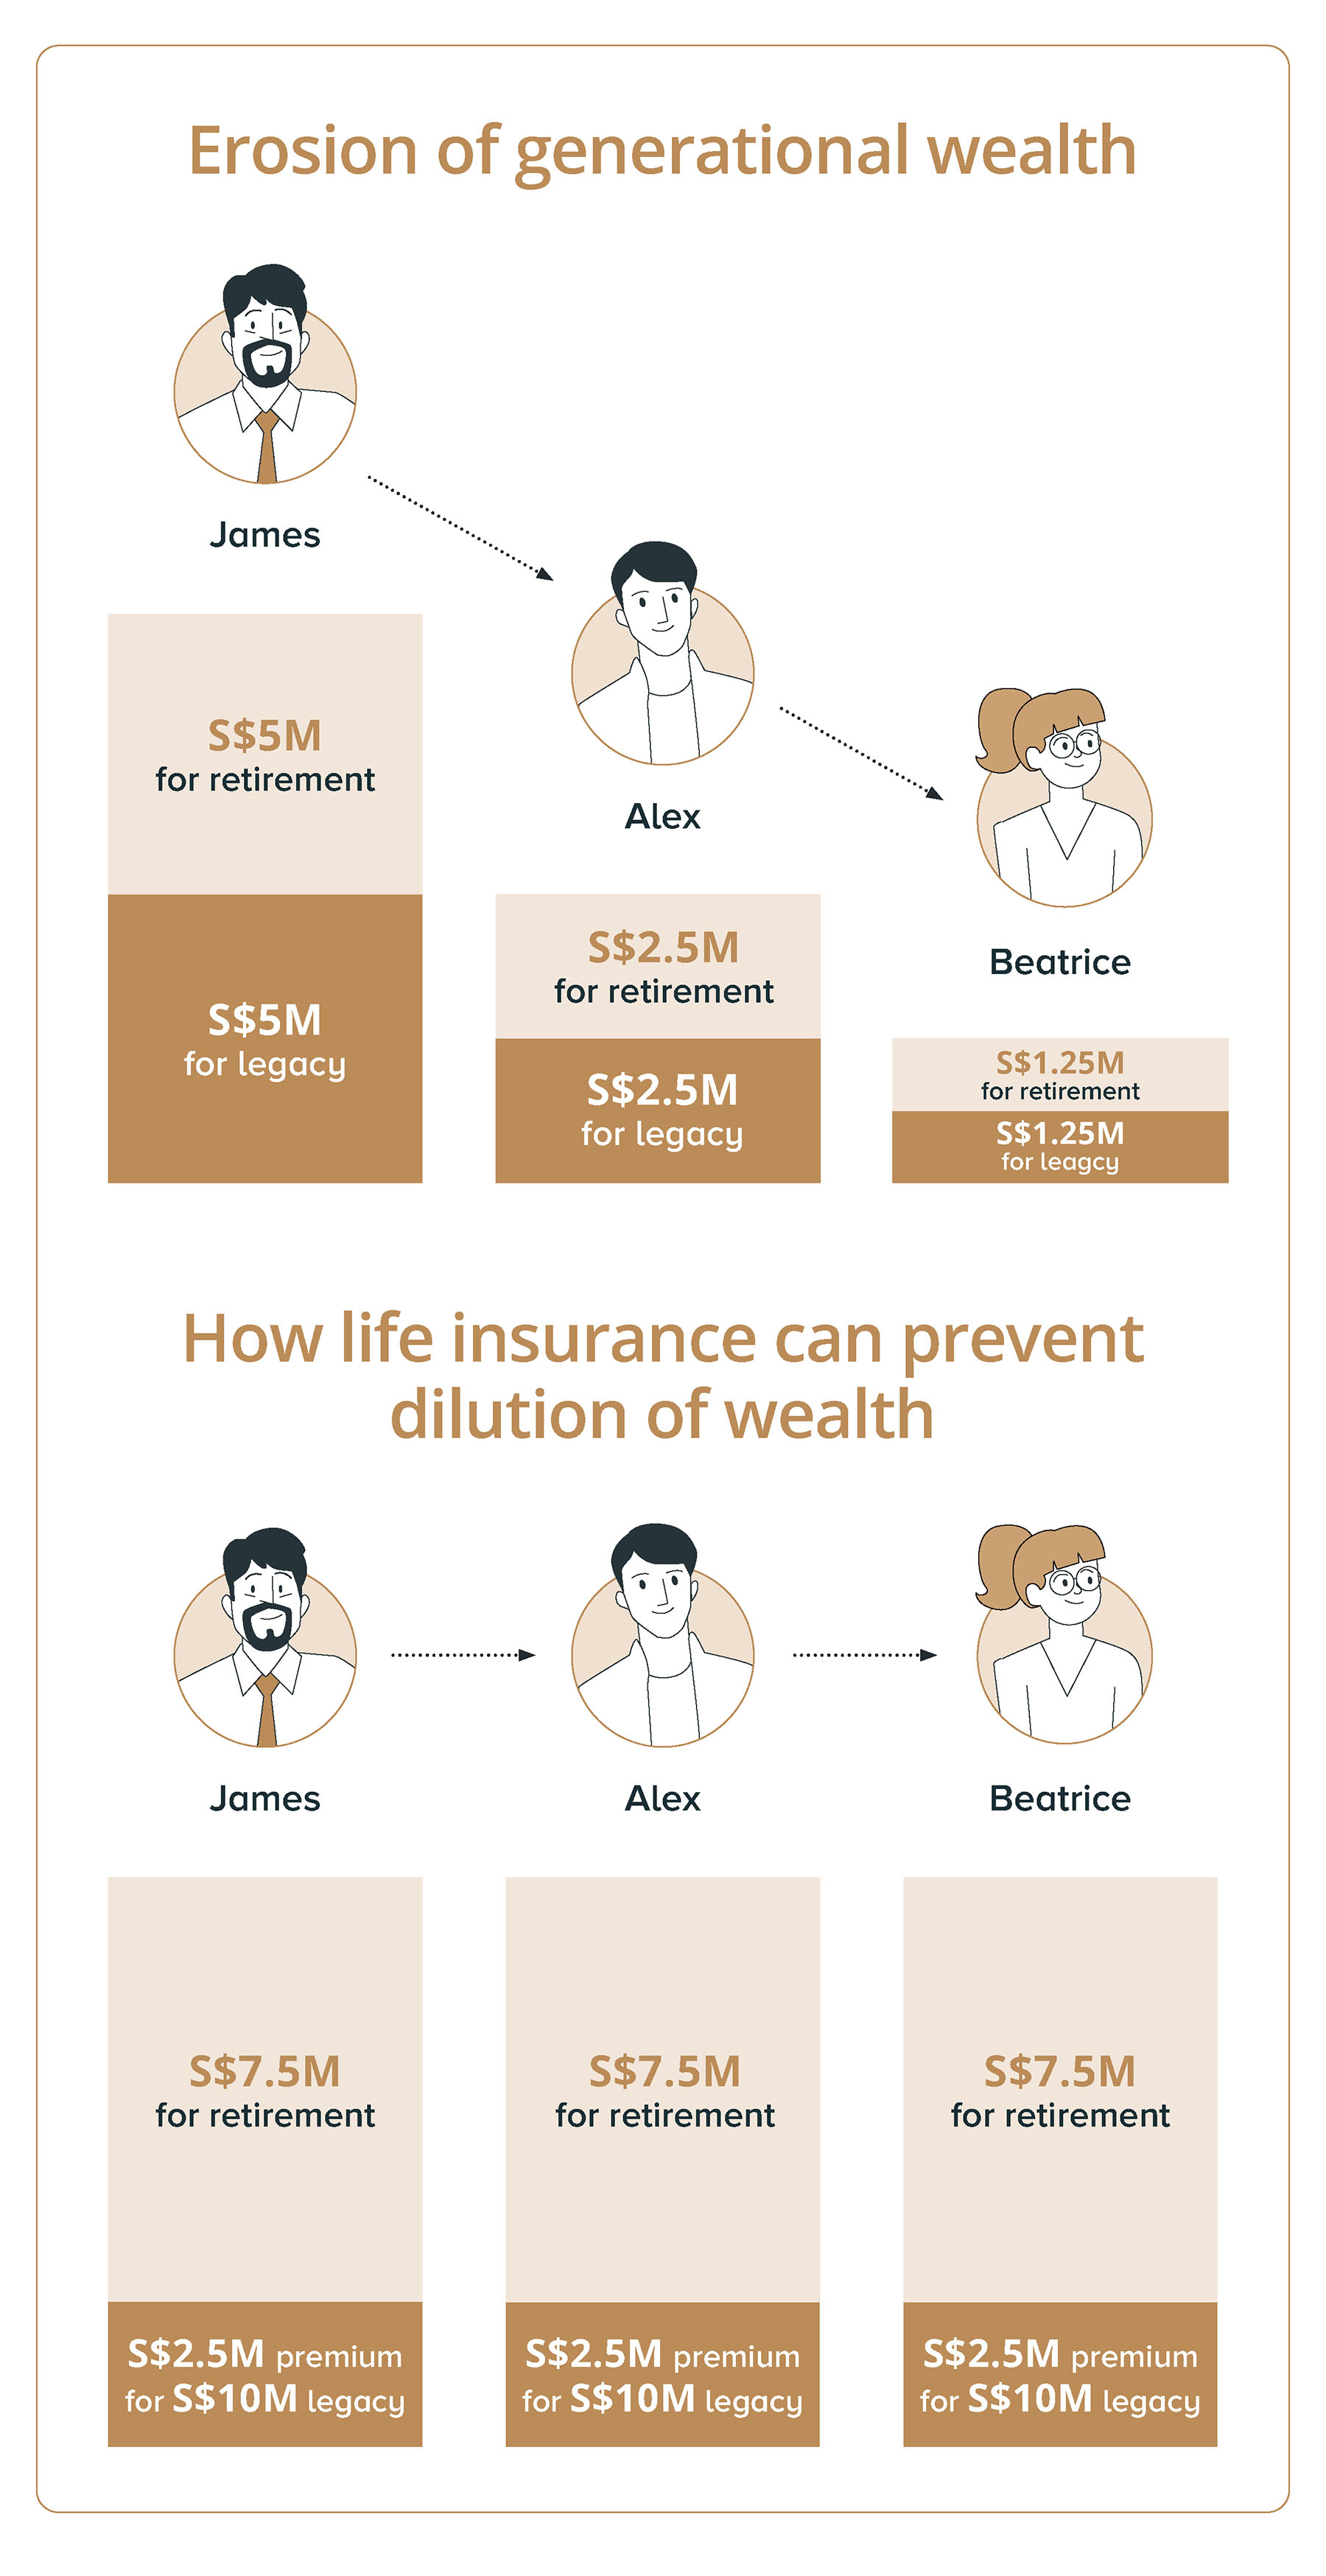 Life insurance payouts preserves generational wealth and prevents it from being eroded over time.